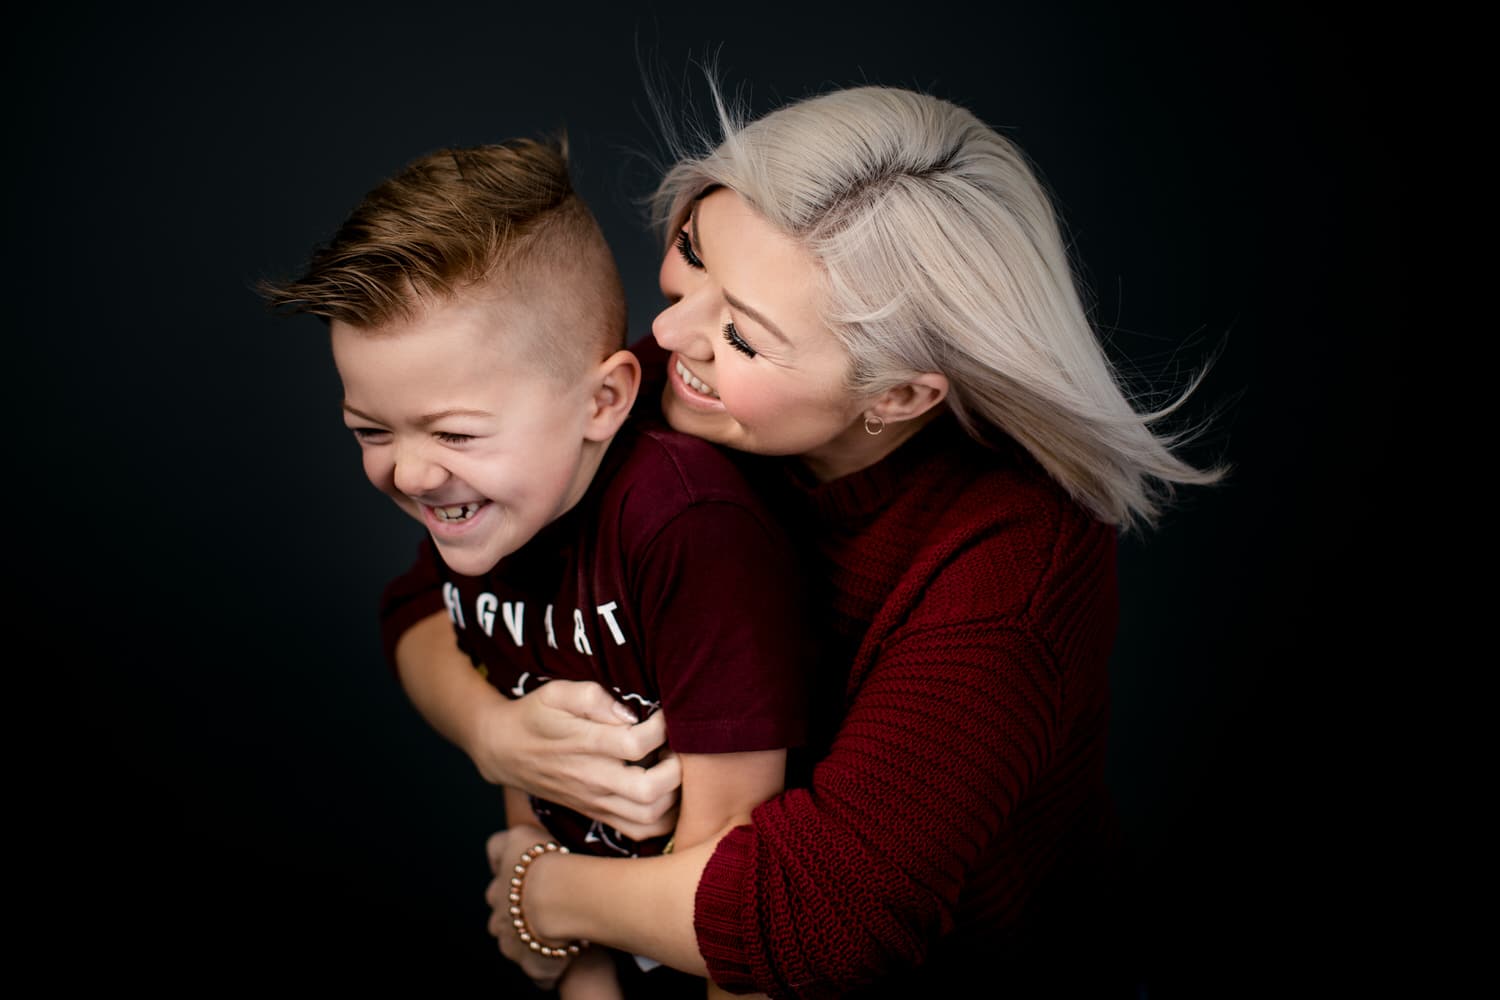 Mom holding her son in Calgary during a professional studio photograph session